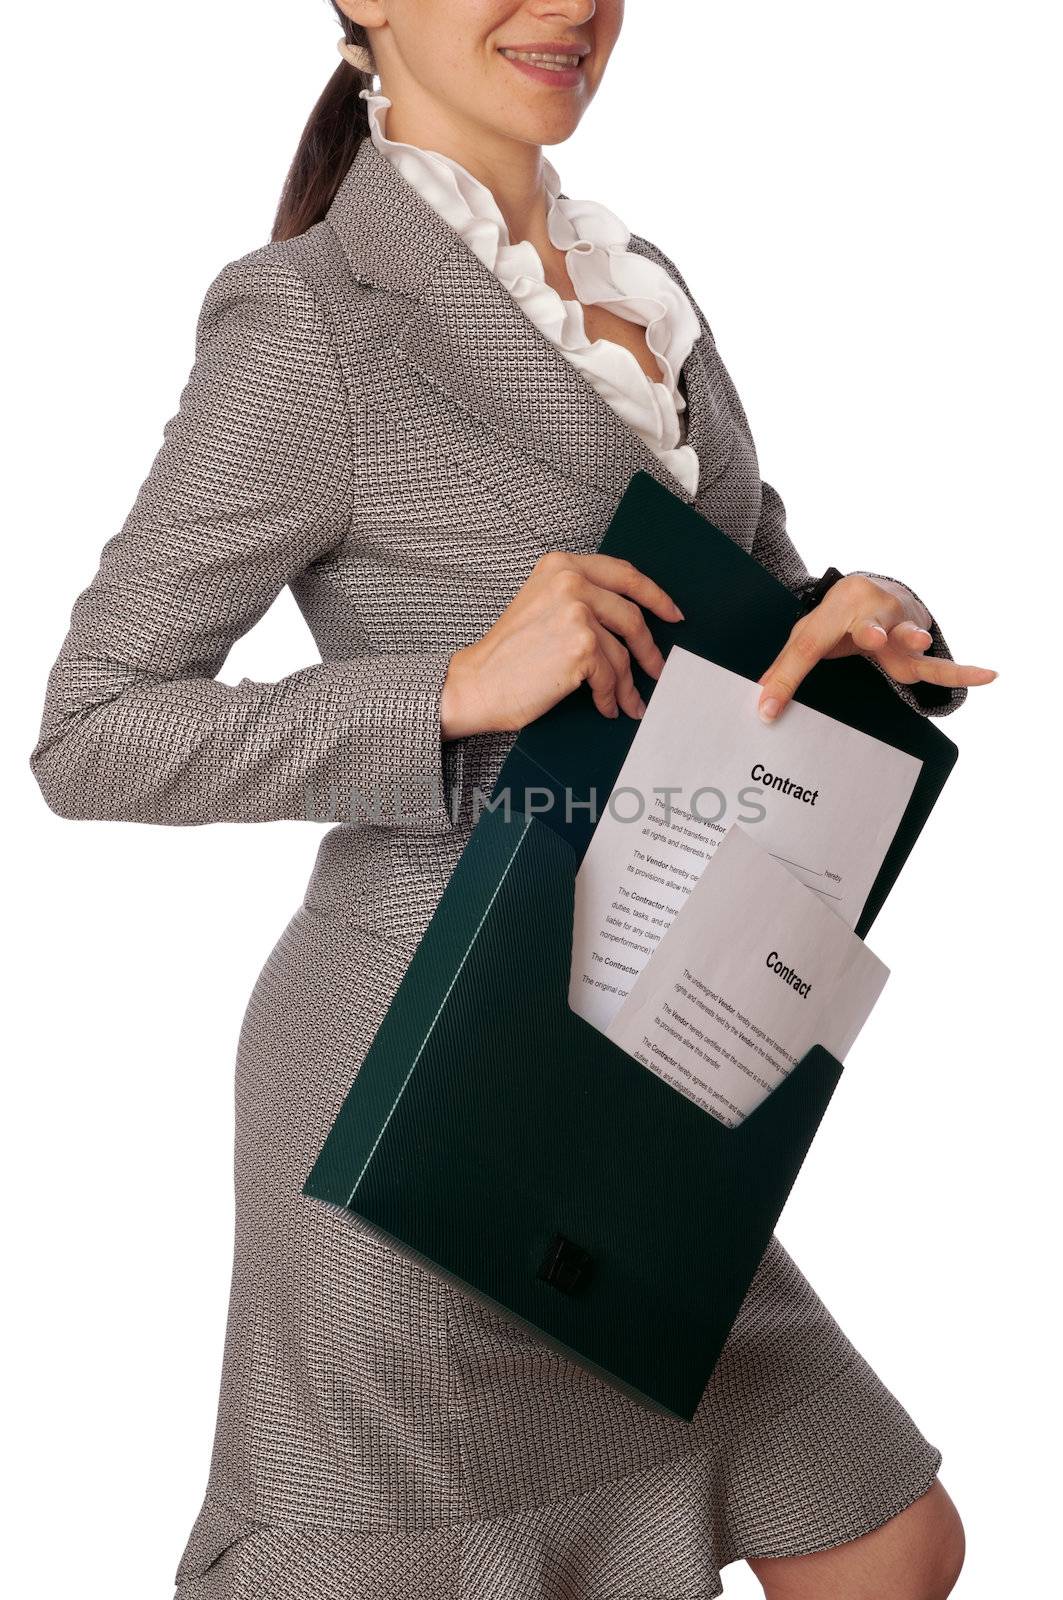 Businesswoman taking out from a suitcase contract for new employees